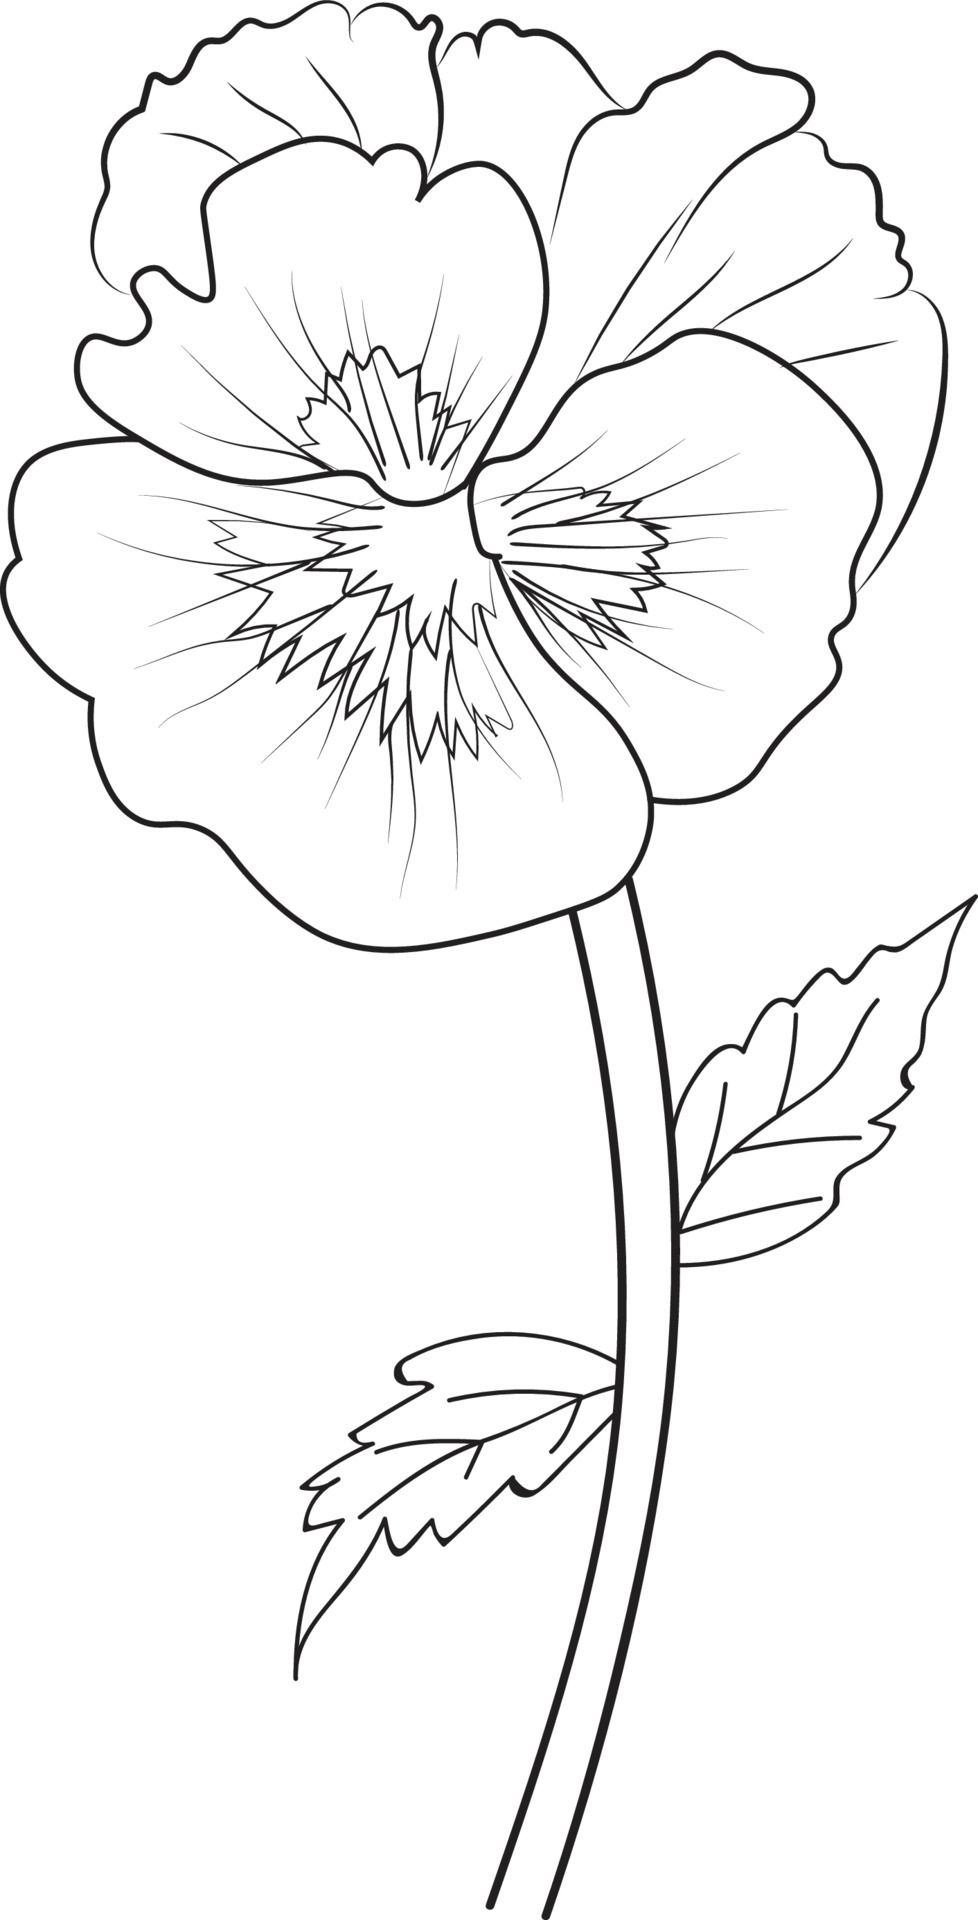 Cute flower coloring pages, pansy drawing, Neon Violet, flower ...